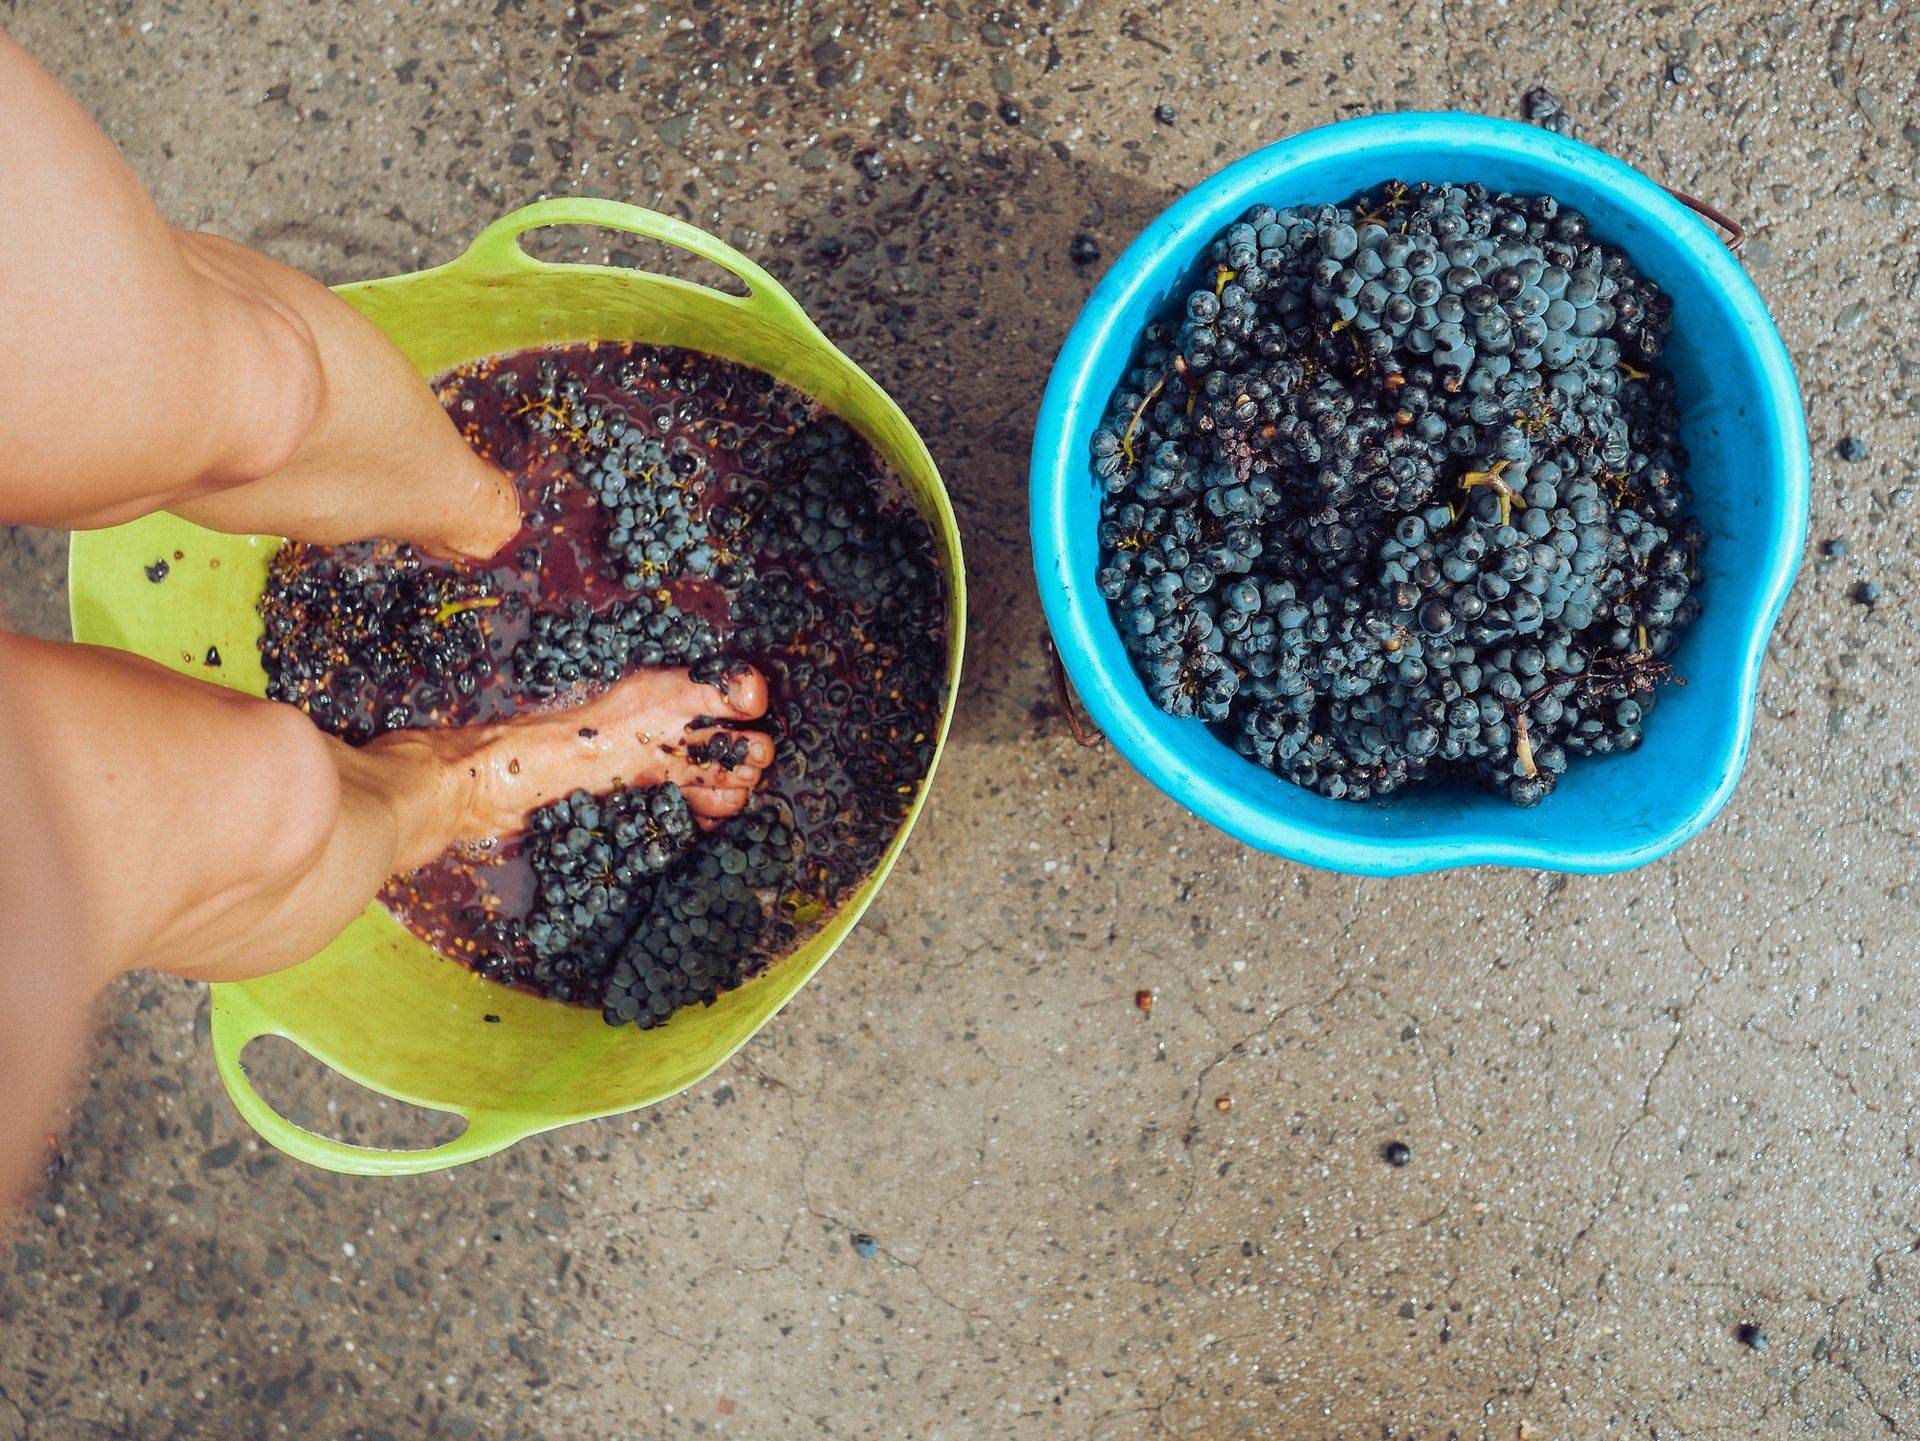 Crush the grapes for homemade wine